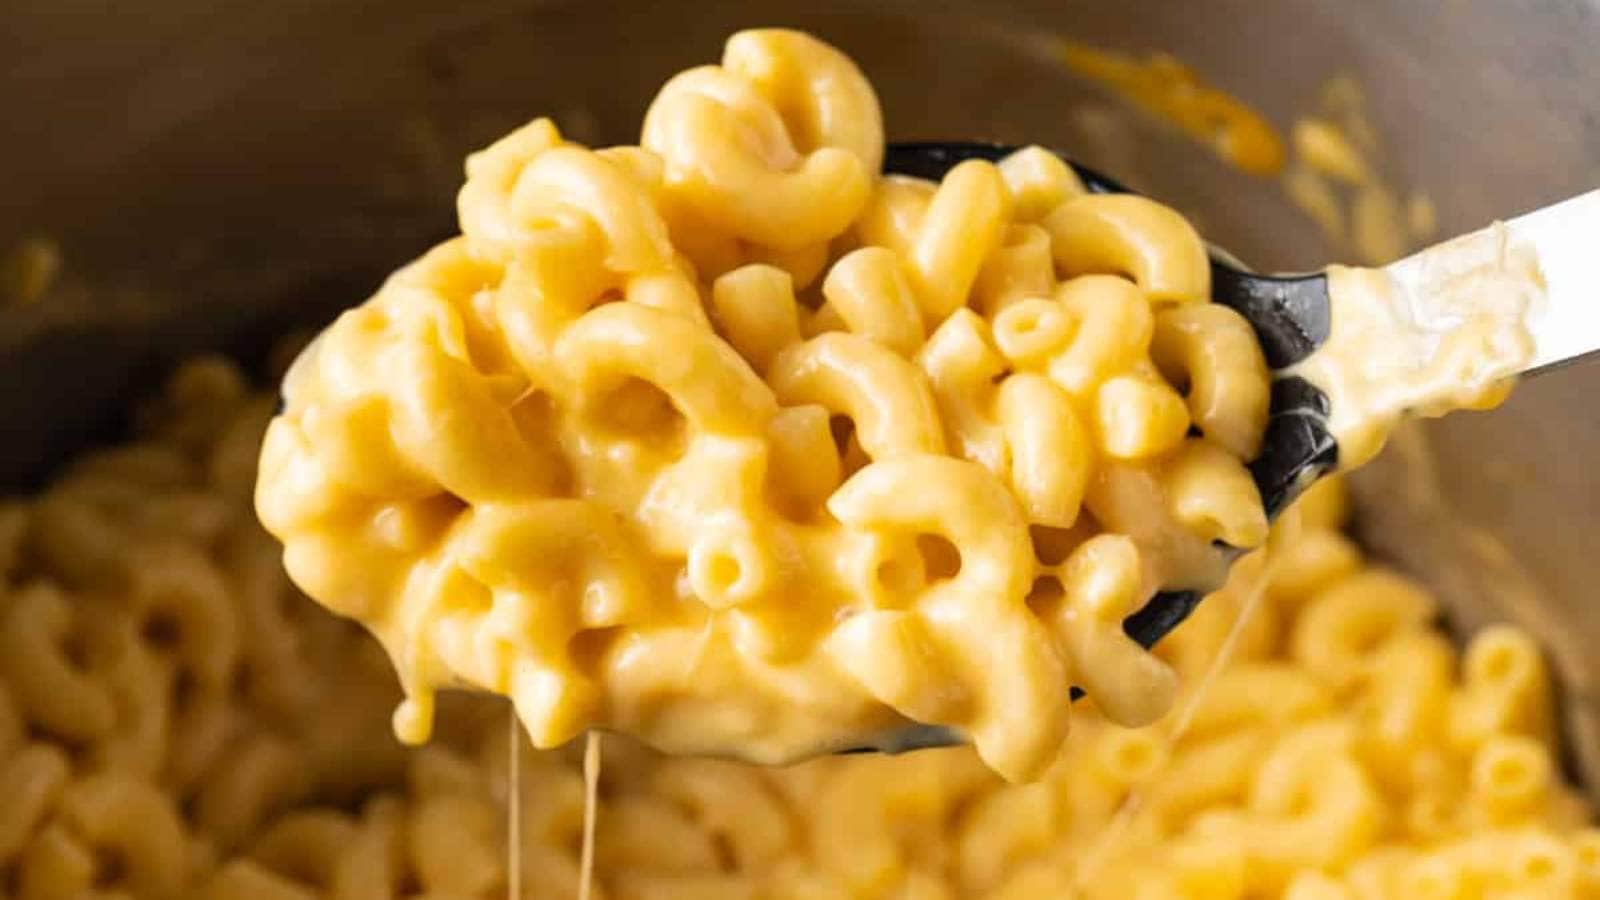 Instant Pot Mac And Cheese recipe by Savory Sweet Spoon.